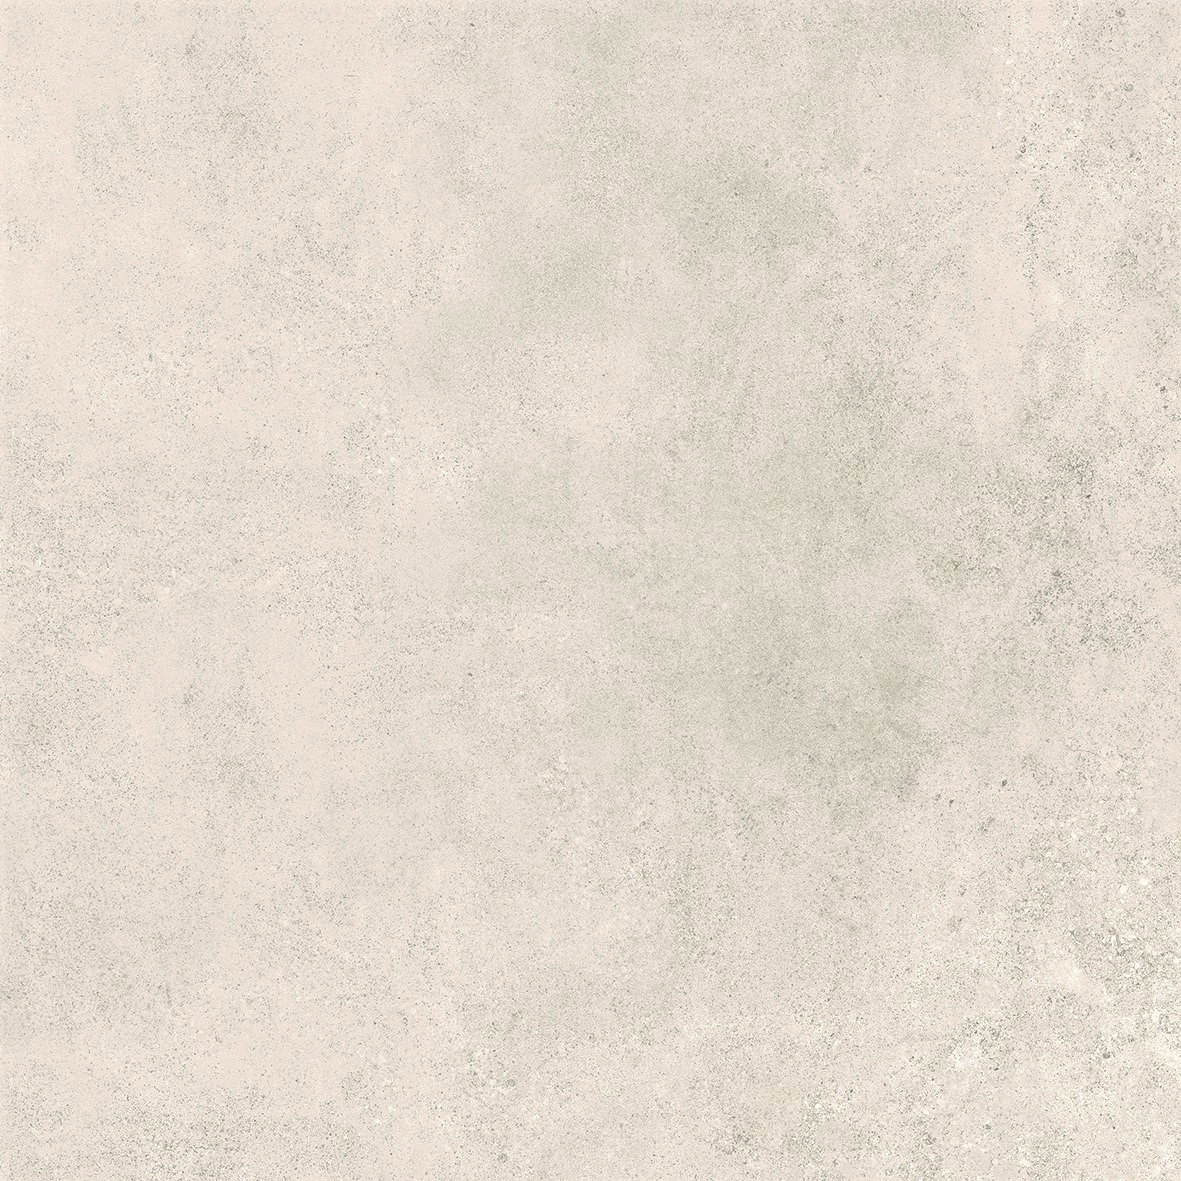 12 X 24 Absolute White Rectified Porcelain tile